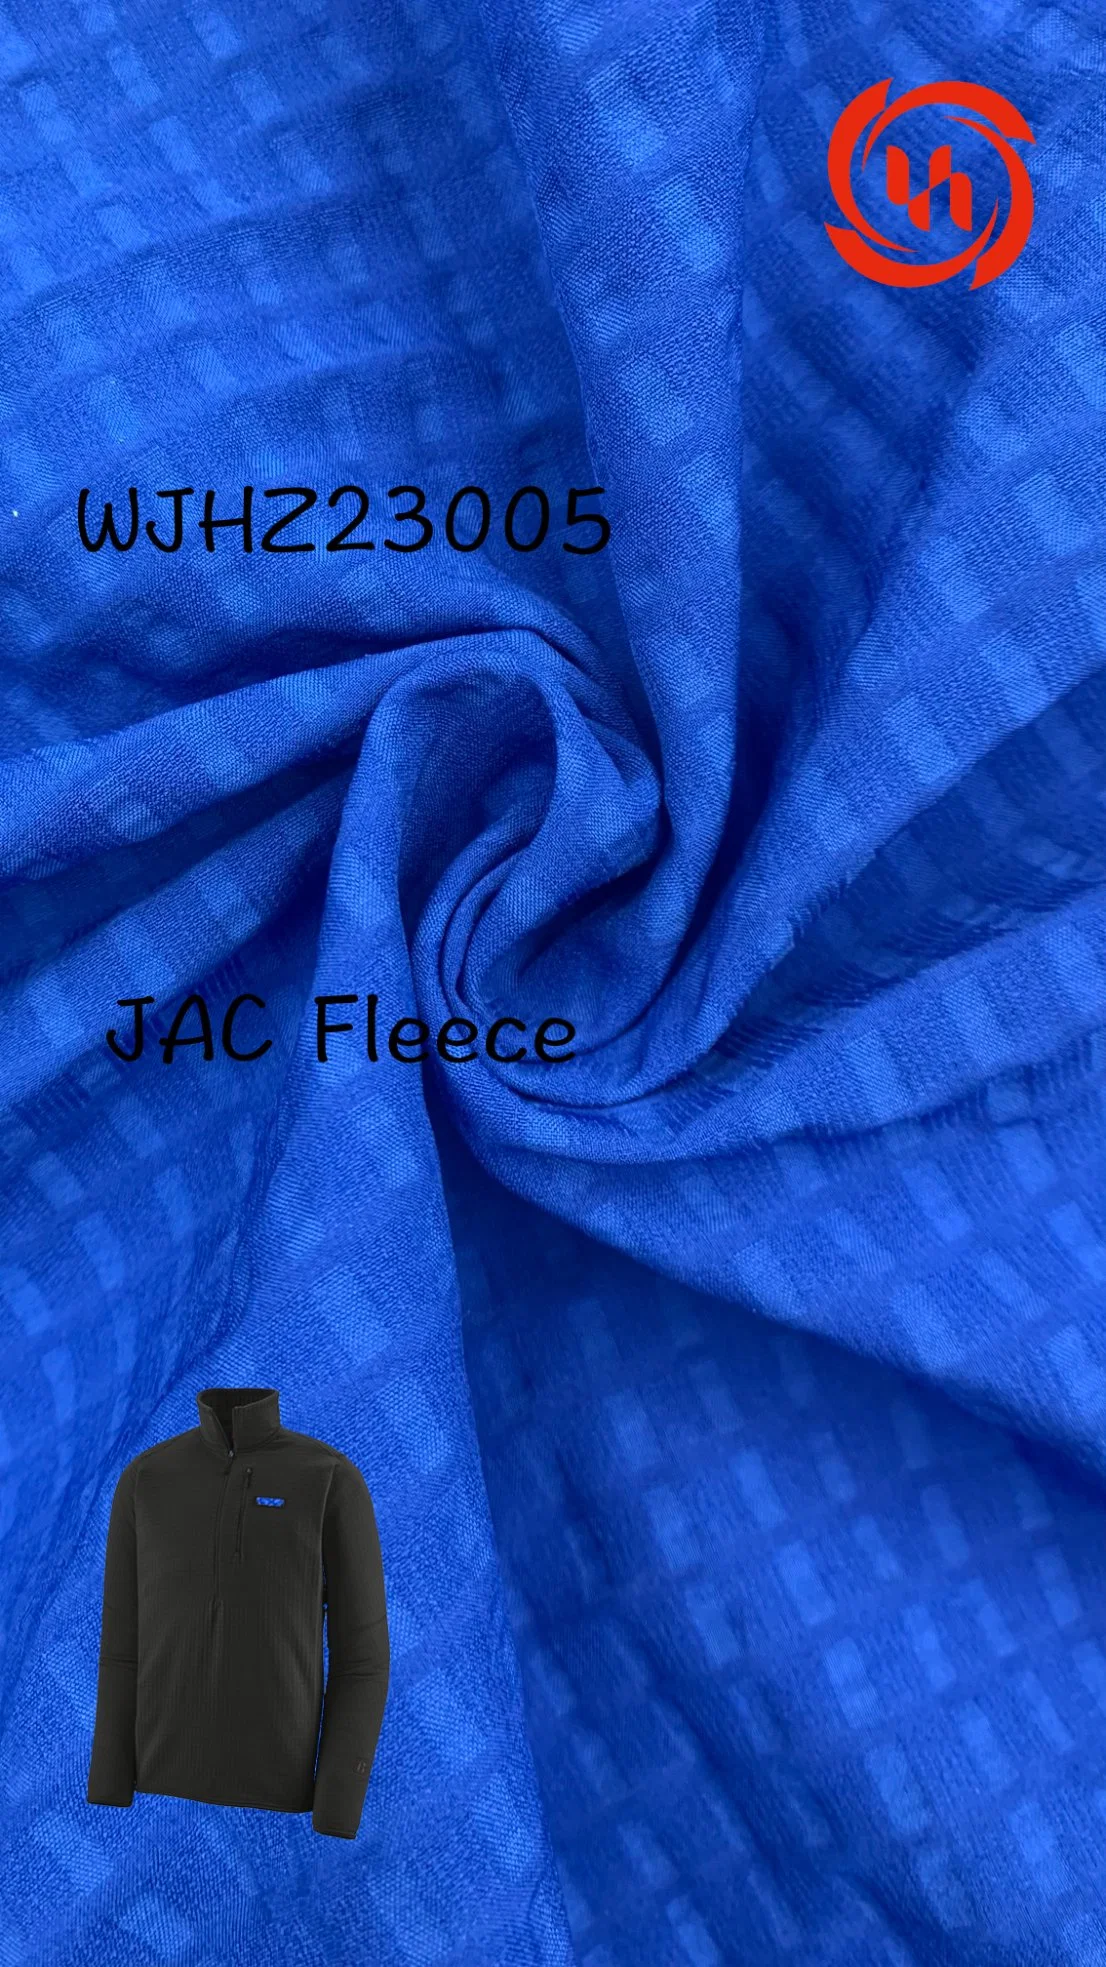 Stretchable and Durable Nylon Spandex Fabric Pfcs Free Waterproof for Outdoor Sportswear